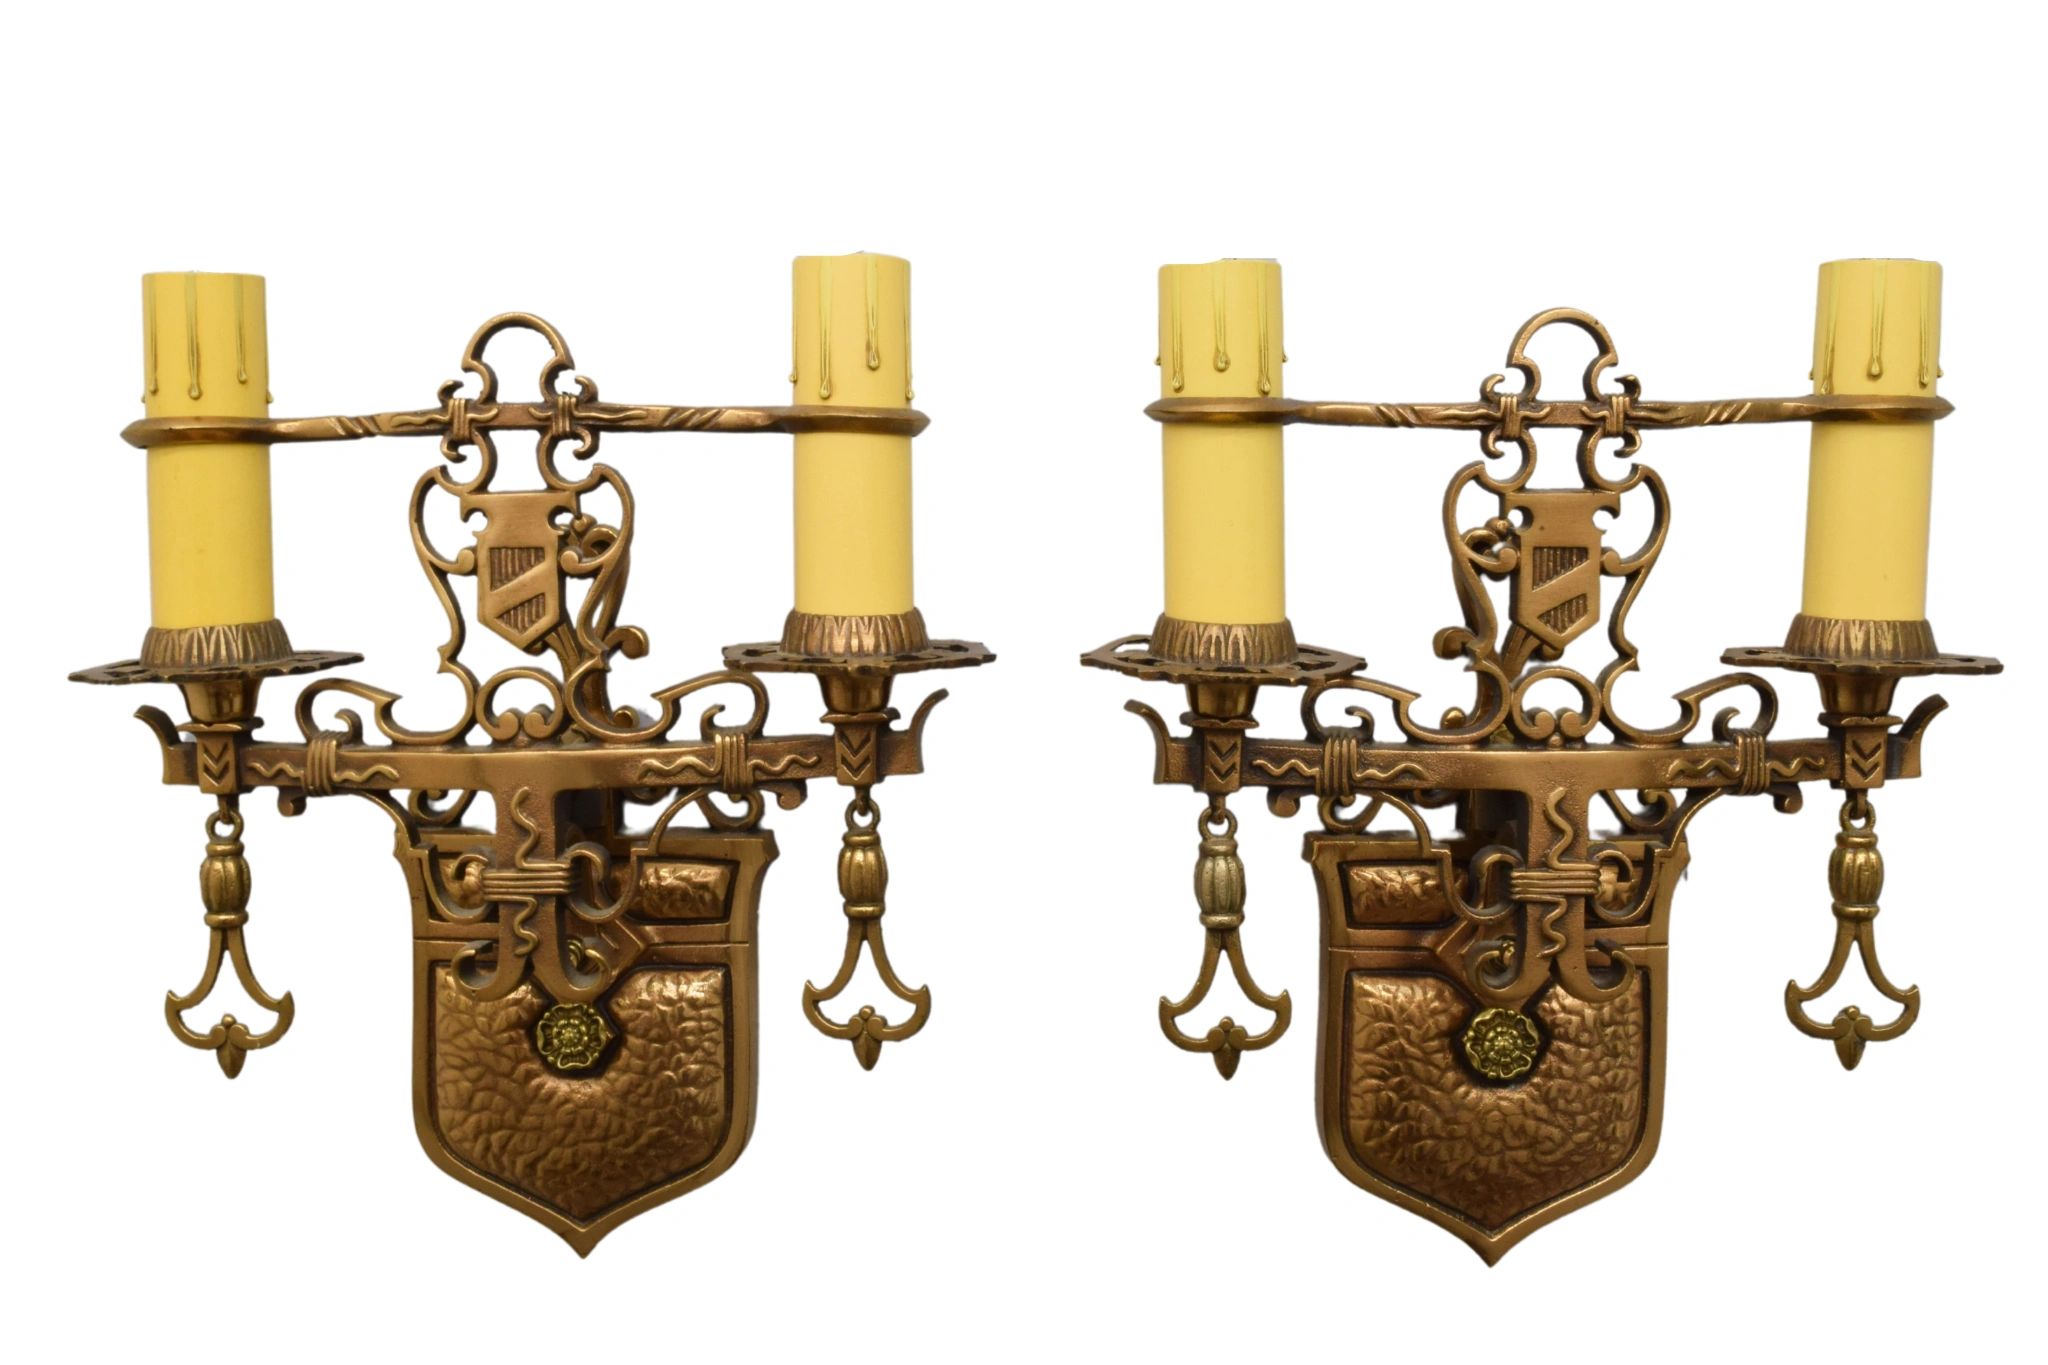 Antique vintage large brass double arm stamped brass candle socket sconce light fixture rewired